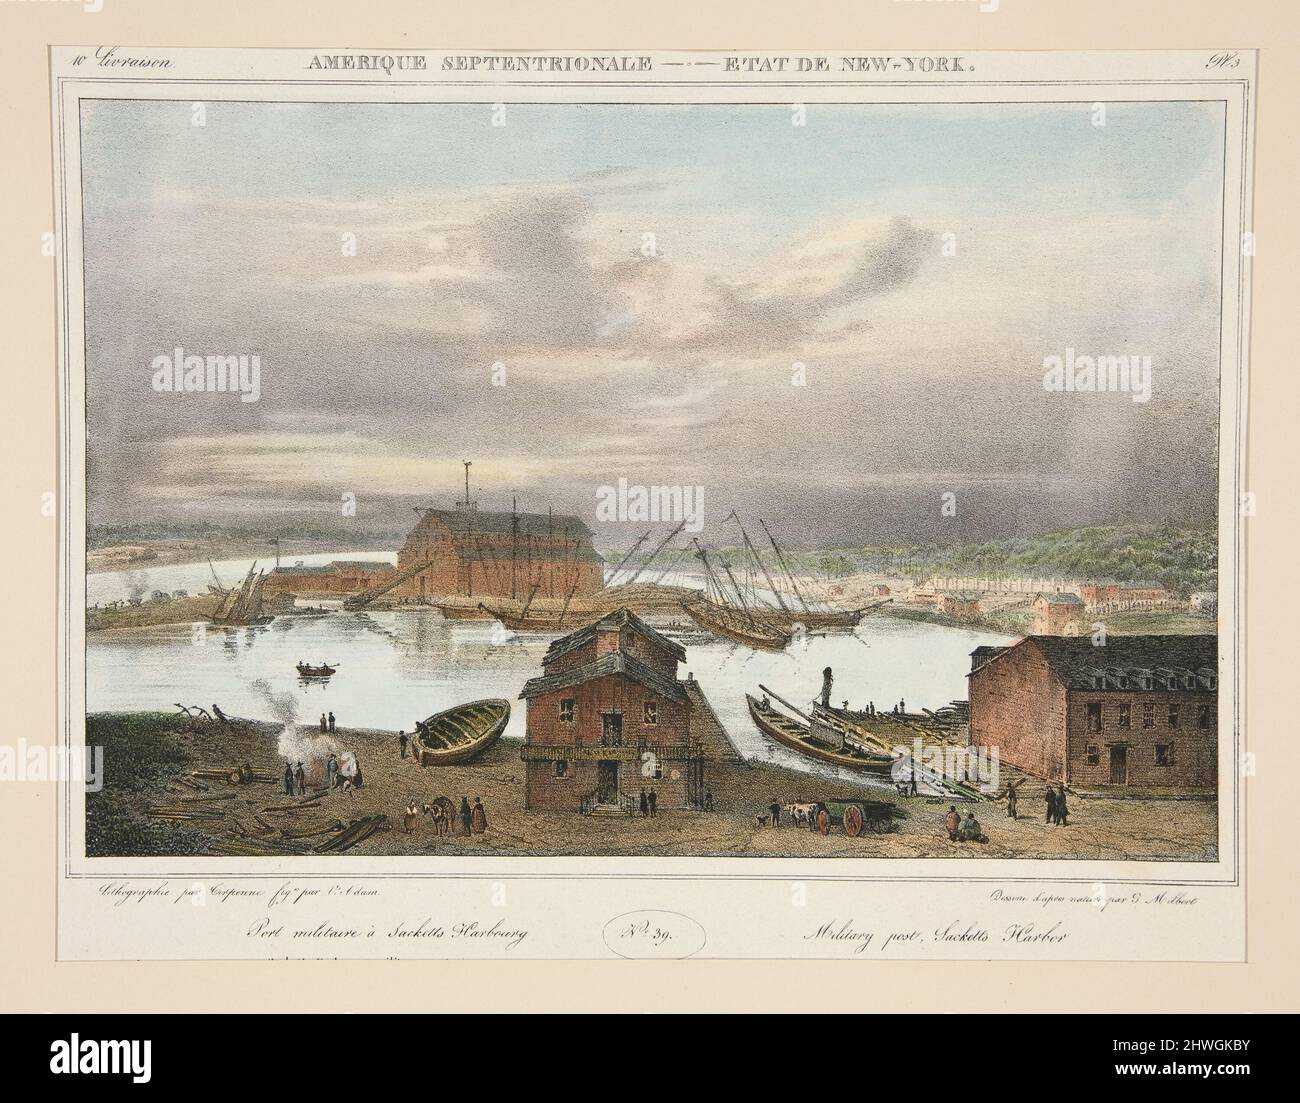 Amerique Septentrionale - Etat de New-York. N. 39, pl. 3…Military post, Sacketts Harbor. Lithographer: J. L. Cirpenne, FrenchLithographer: Victor Adam, French, 1801–1866After: Jacques Gerard Milbert, French, 1766–1840 Stock Photo